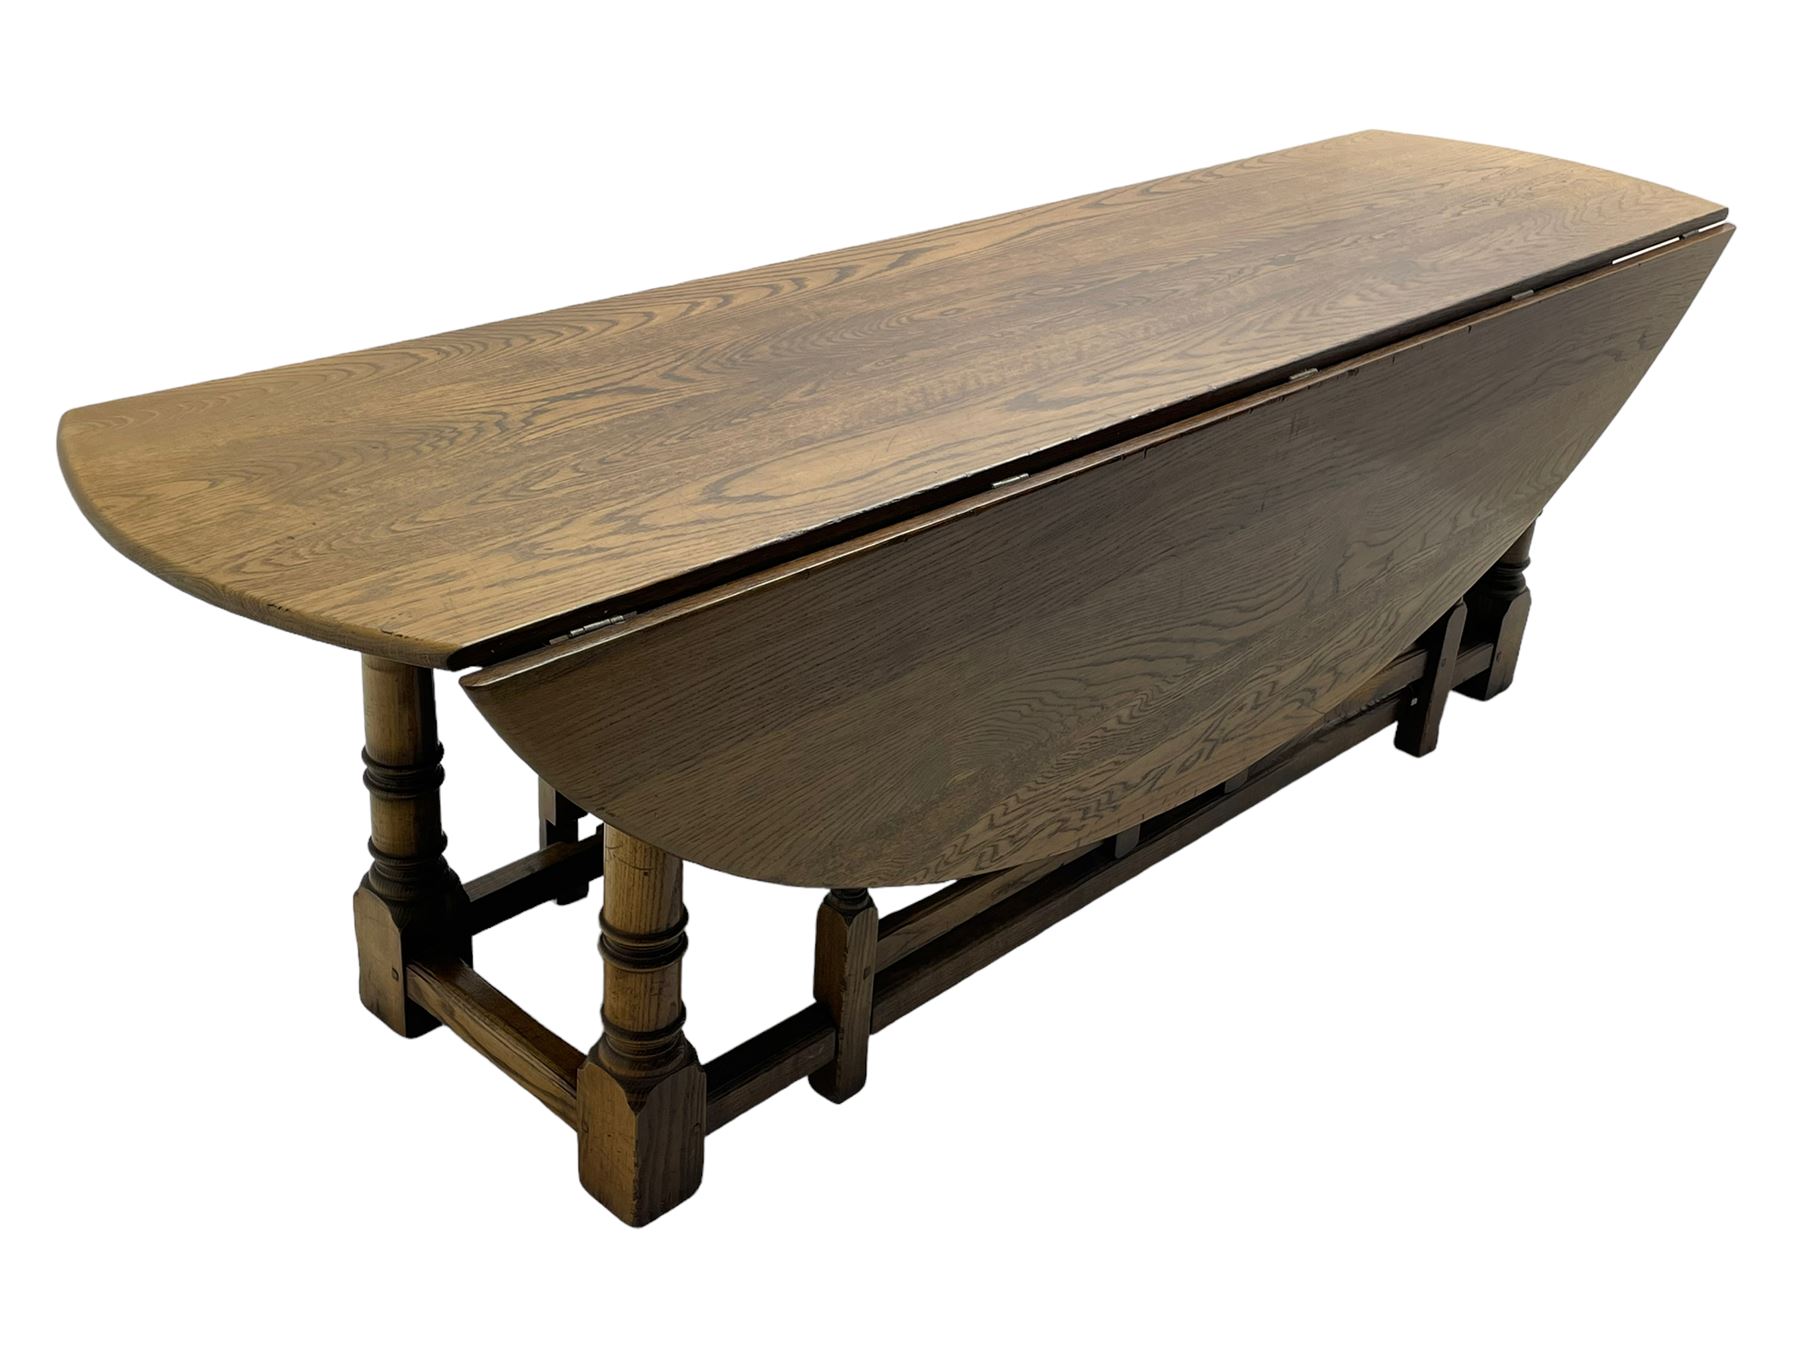 Large 18th century design oak wake or dining table - Image 10 of 12